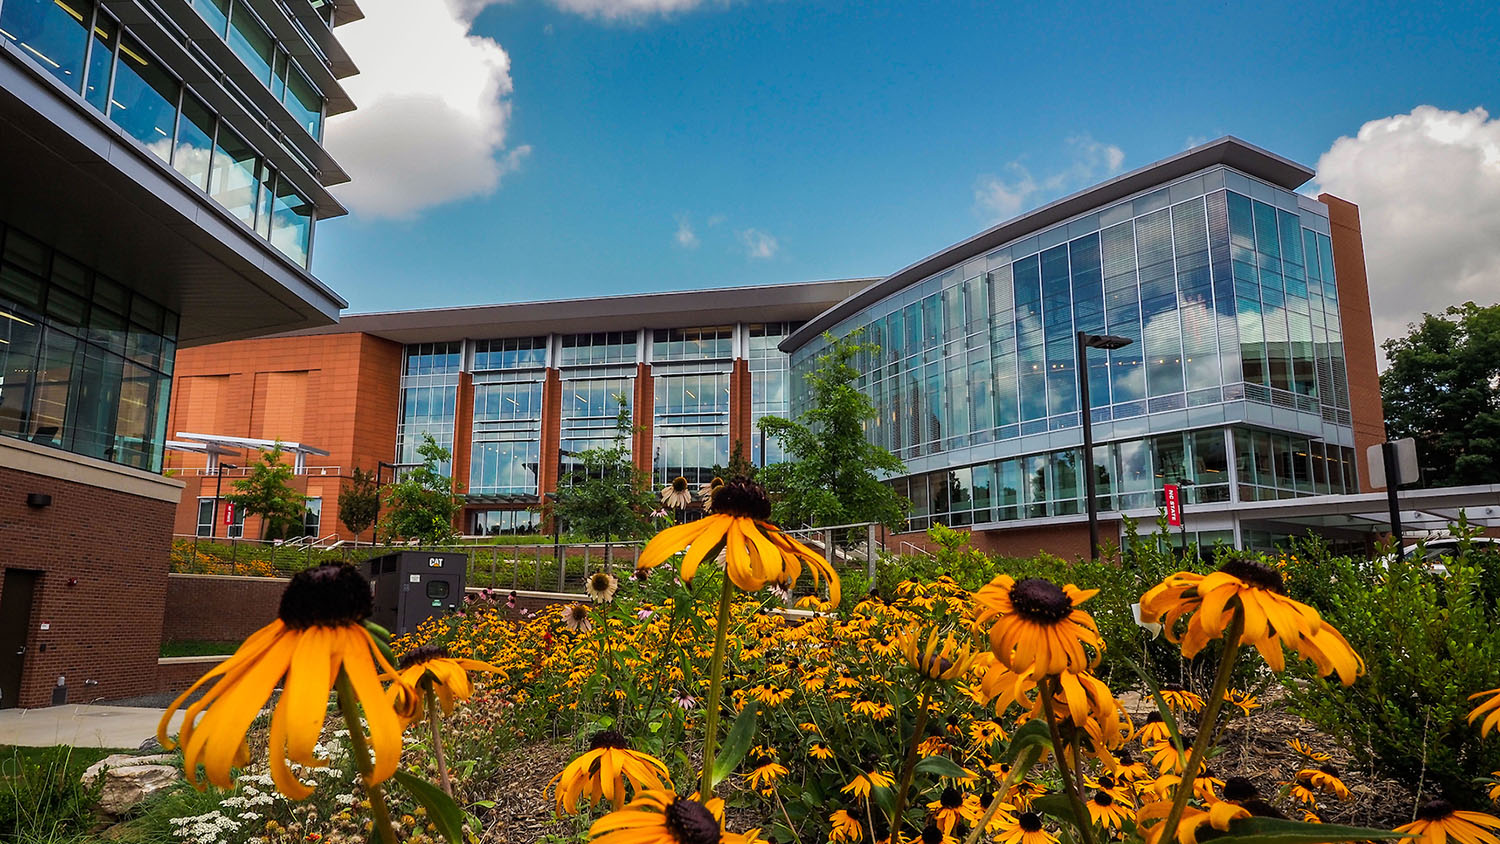 The exterior of Talley Student Union with the building surrounded by yellow flowers.